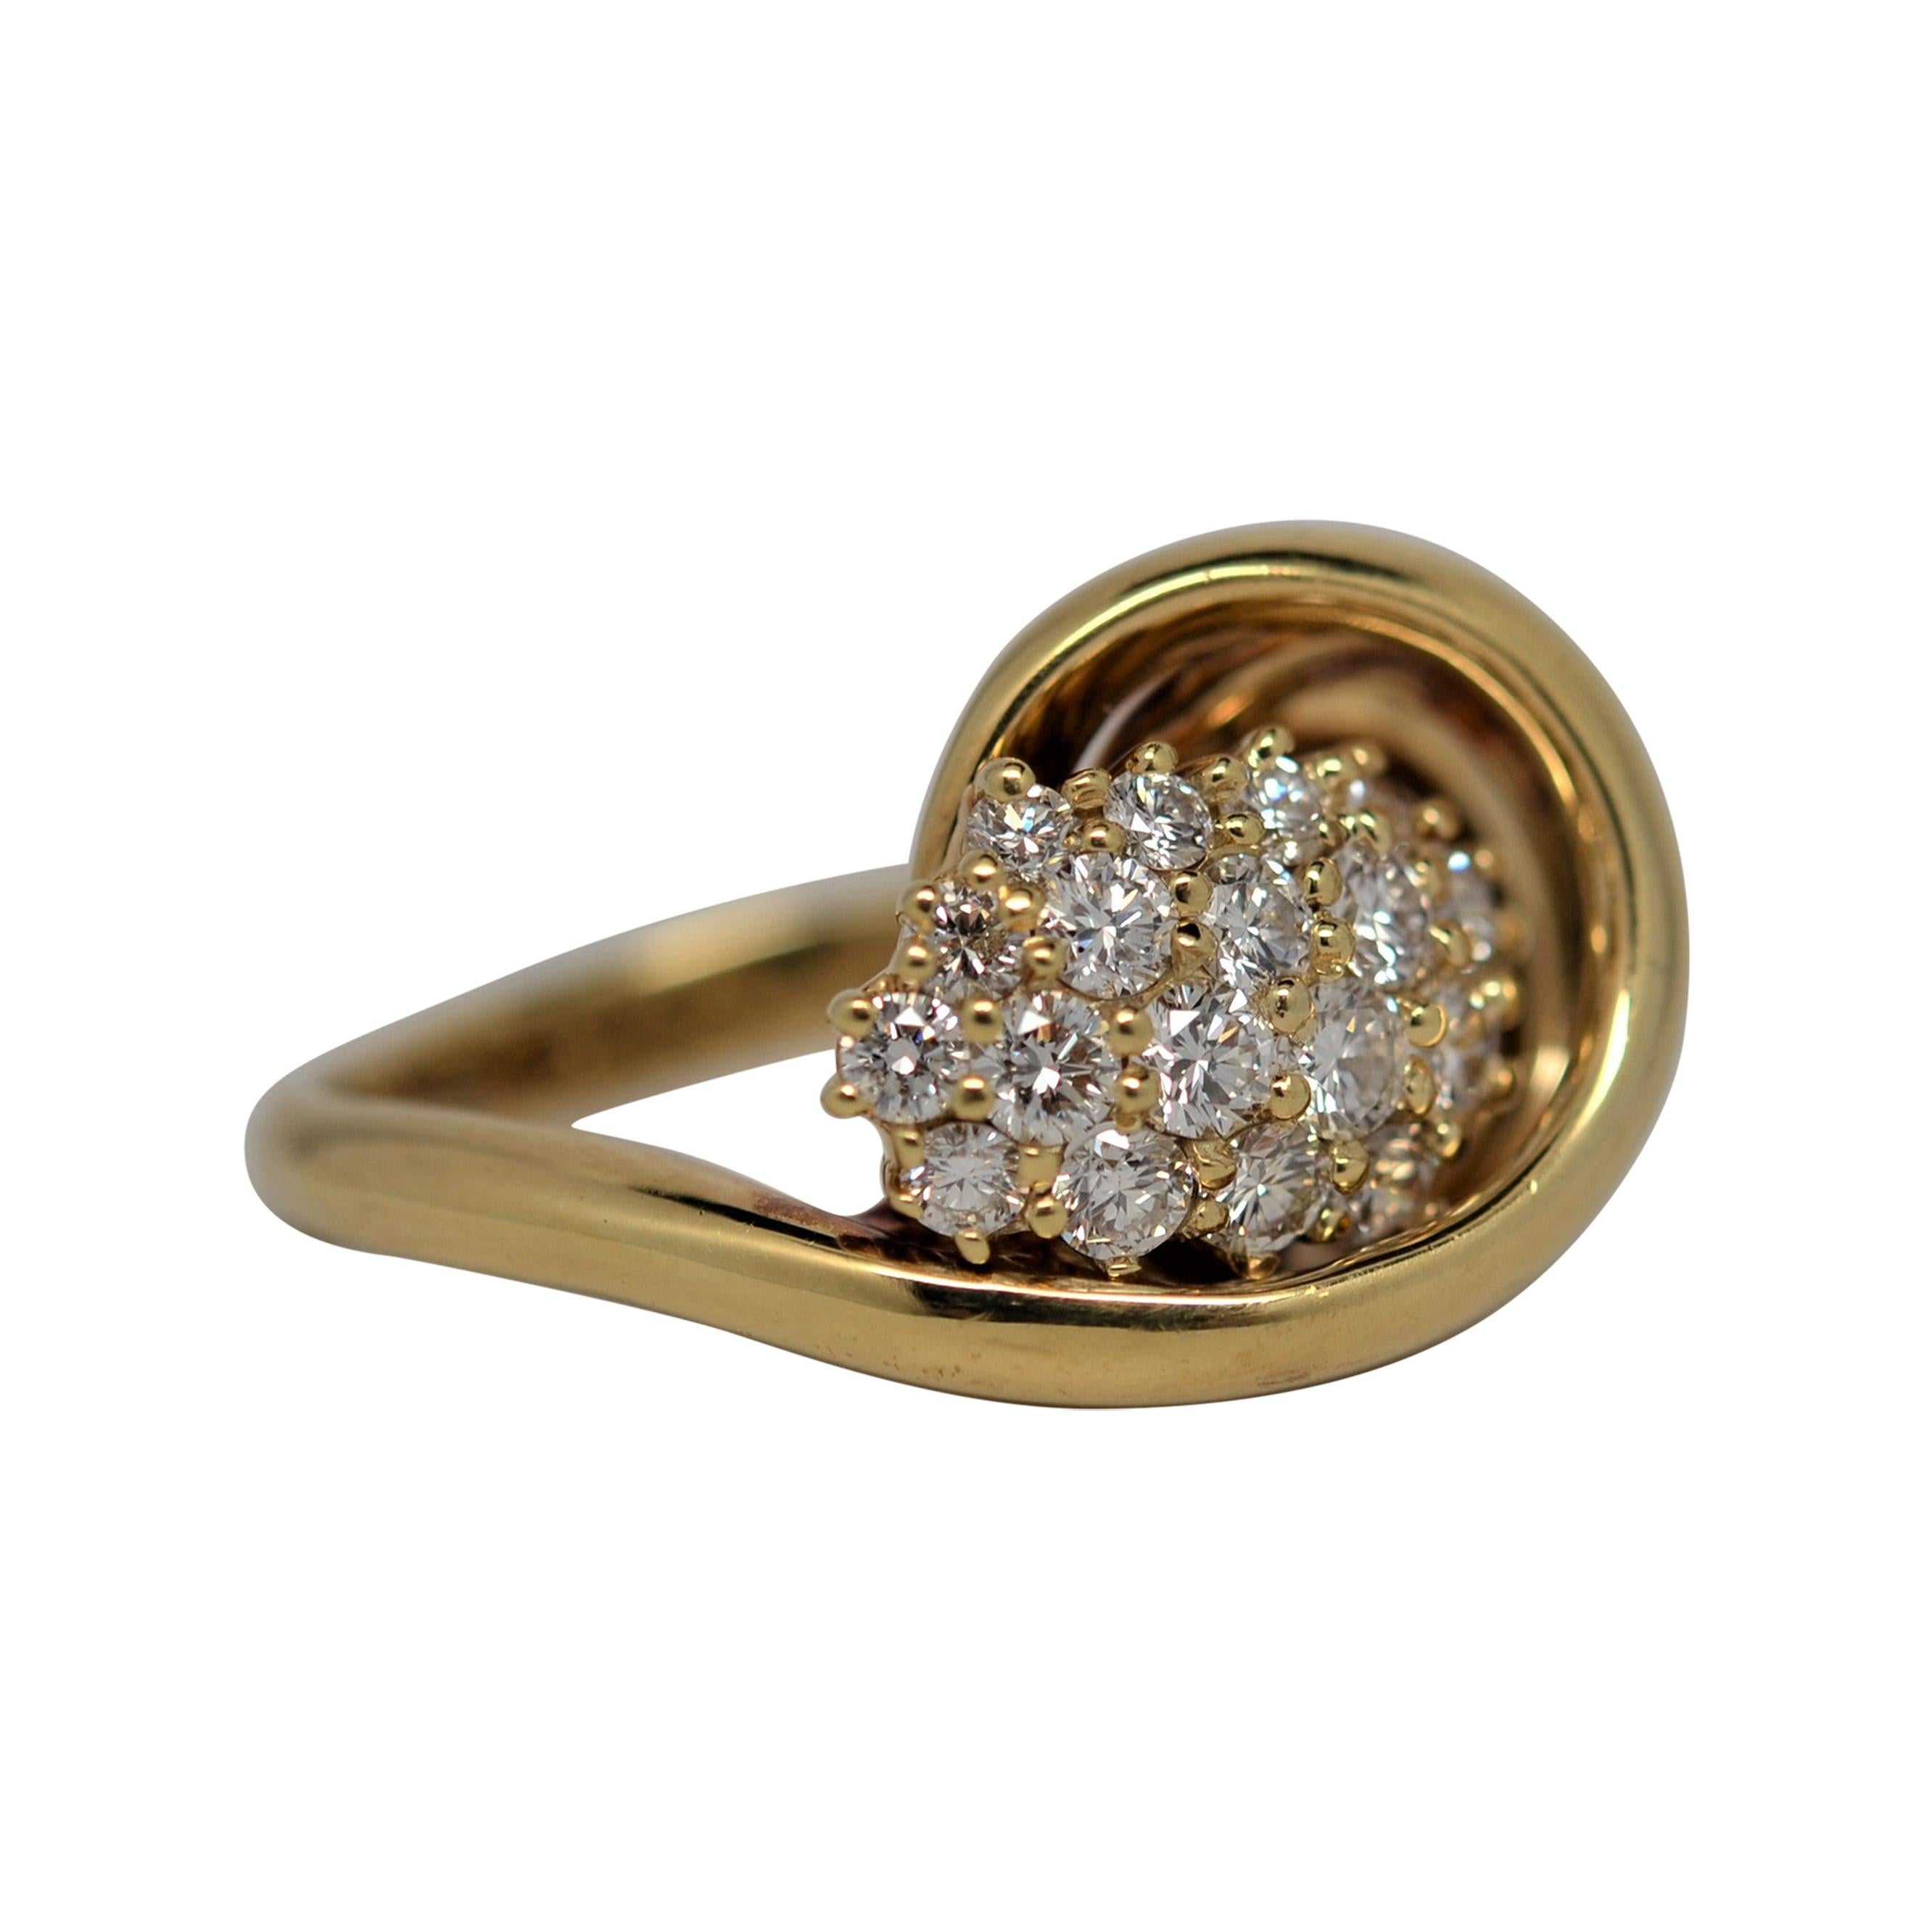 Jose Hess 14k Cluster Ring with Round Brilliant Cut Diamonds, 0.94 Carats For Sale